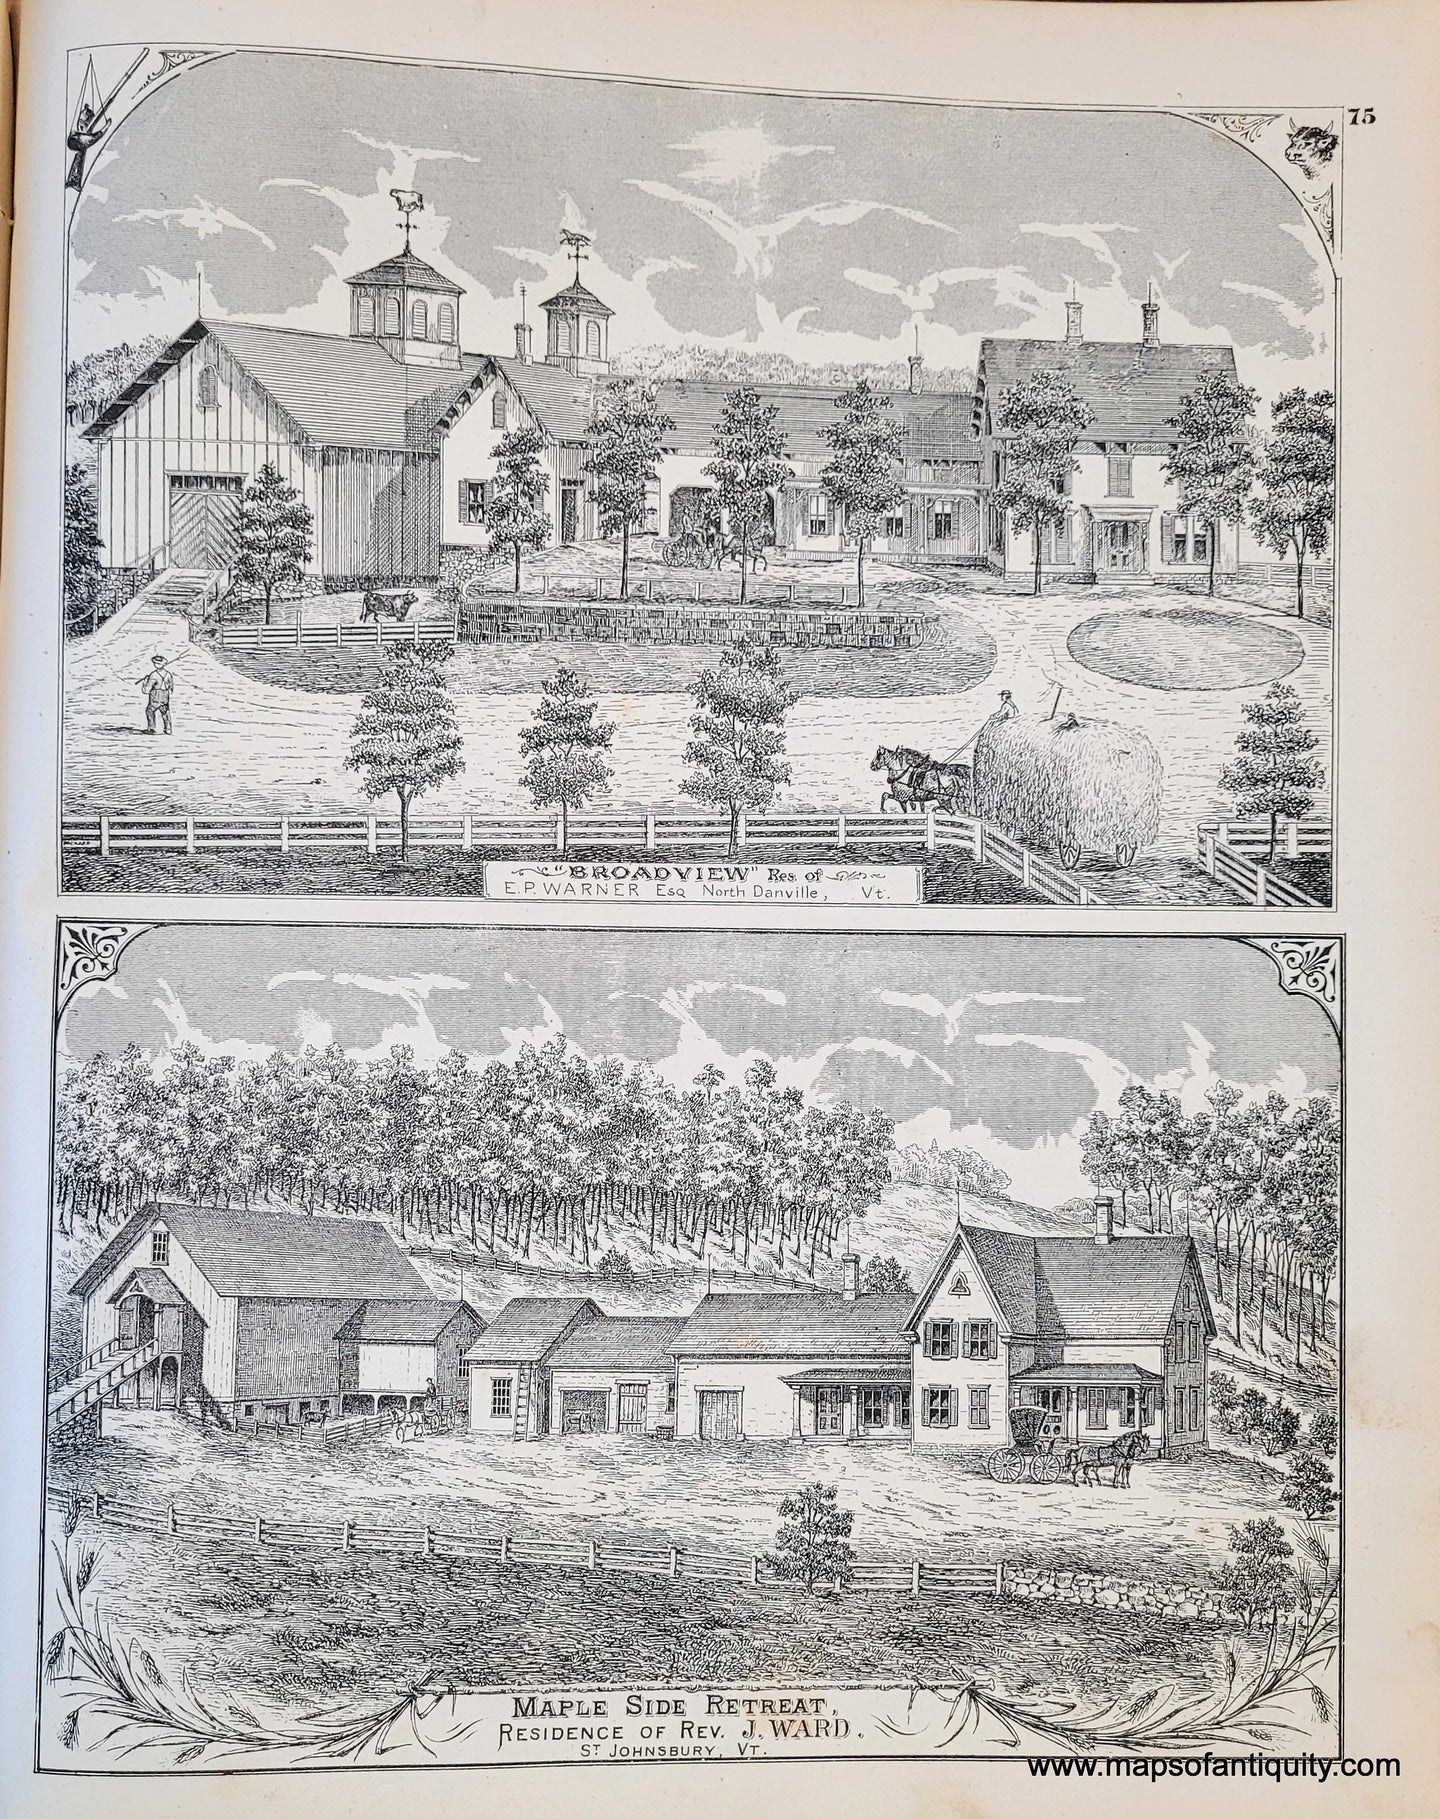 Genuine-Antique-Print-Page-of-Illustrations-Broadview-in-North-Danville-and-Maple-Side-Retreat-in-St-Johnsbury-VT--1875-Beers-Maps-Of-Antiquity